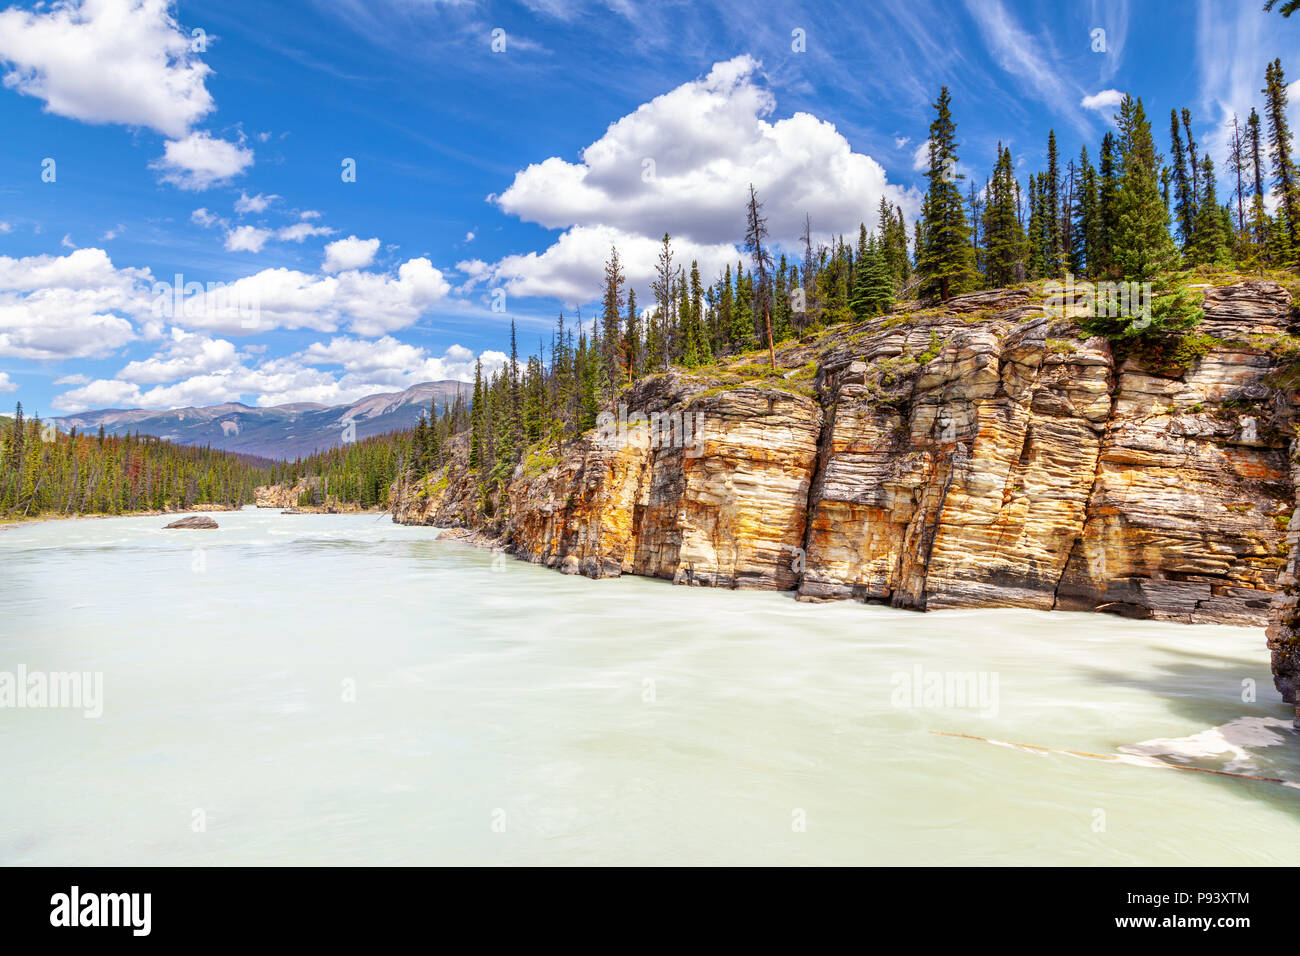 Athabasca River with stunning canyon walls at Athabasca Falls in Jasper National Park on the Icefield Parkway in Alberta, Canada. Stock Photo